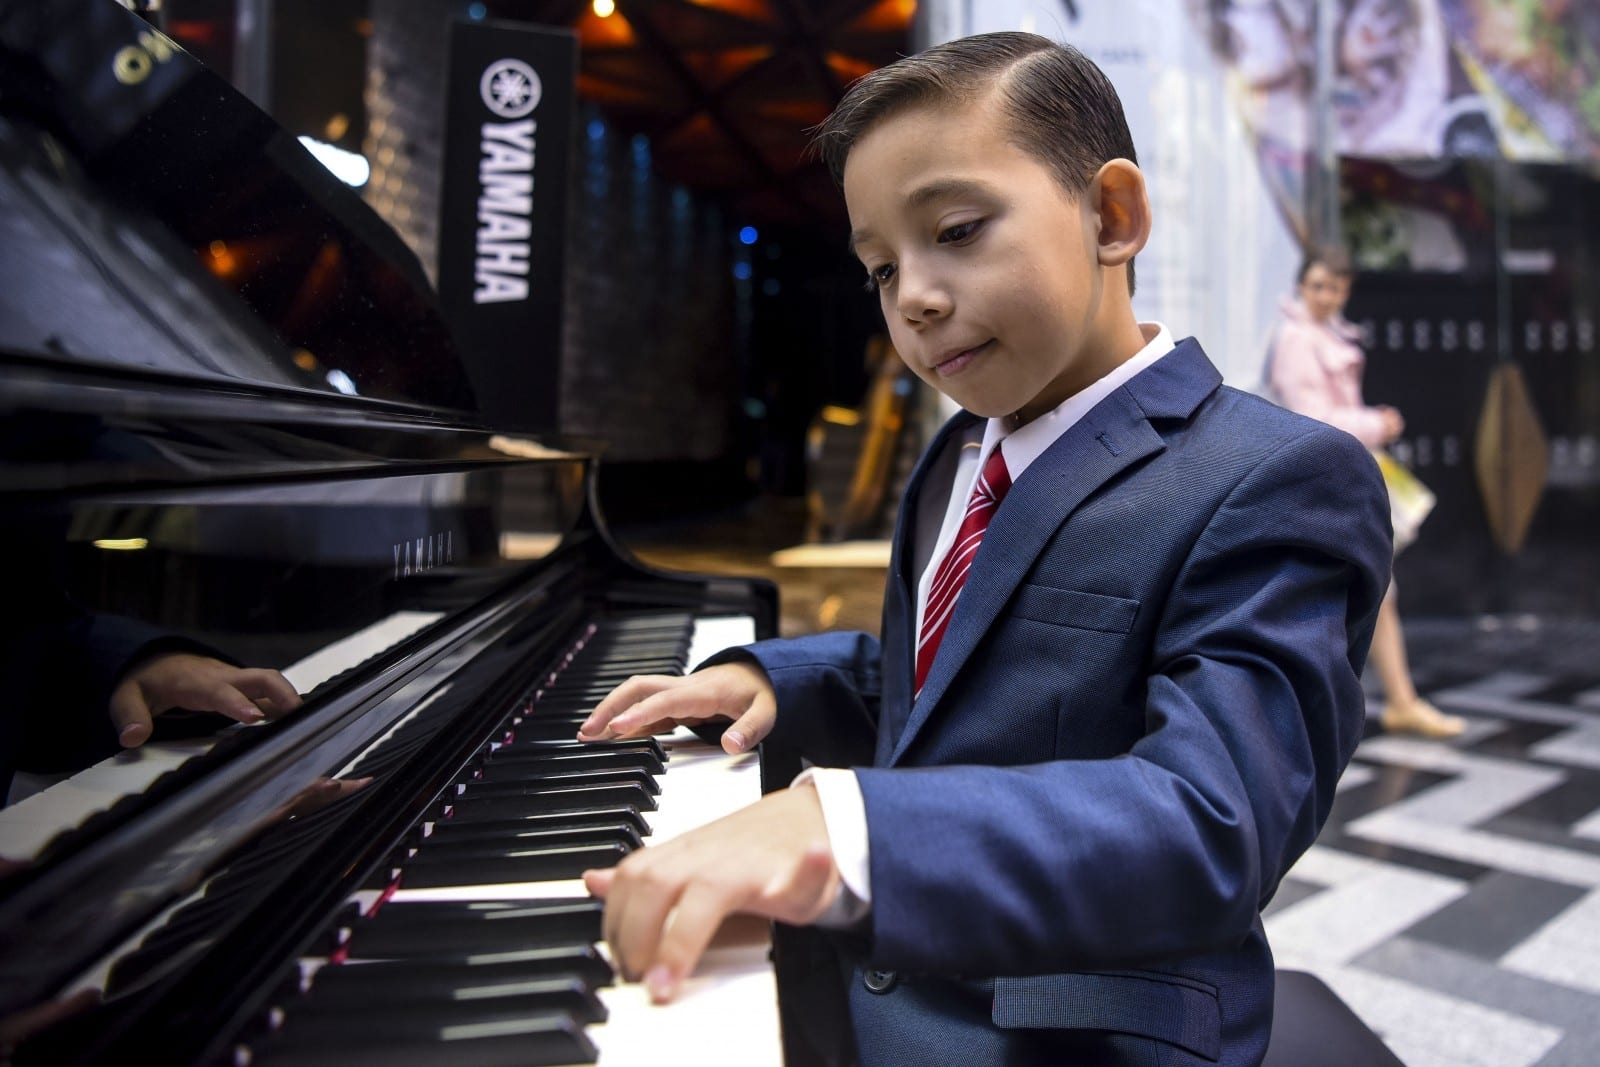 From Piano Prodigy To Internet Sensation: Guess Who This Little Musician Turned Into!